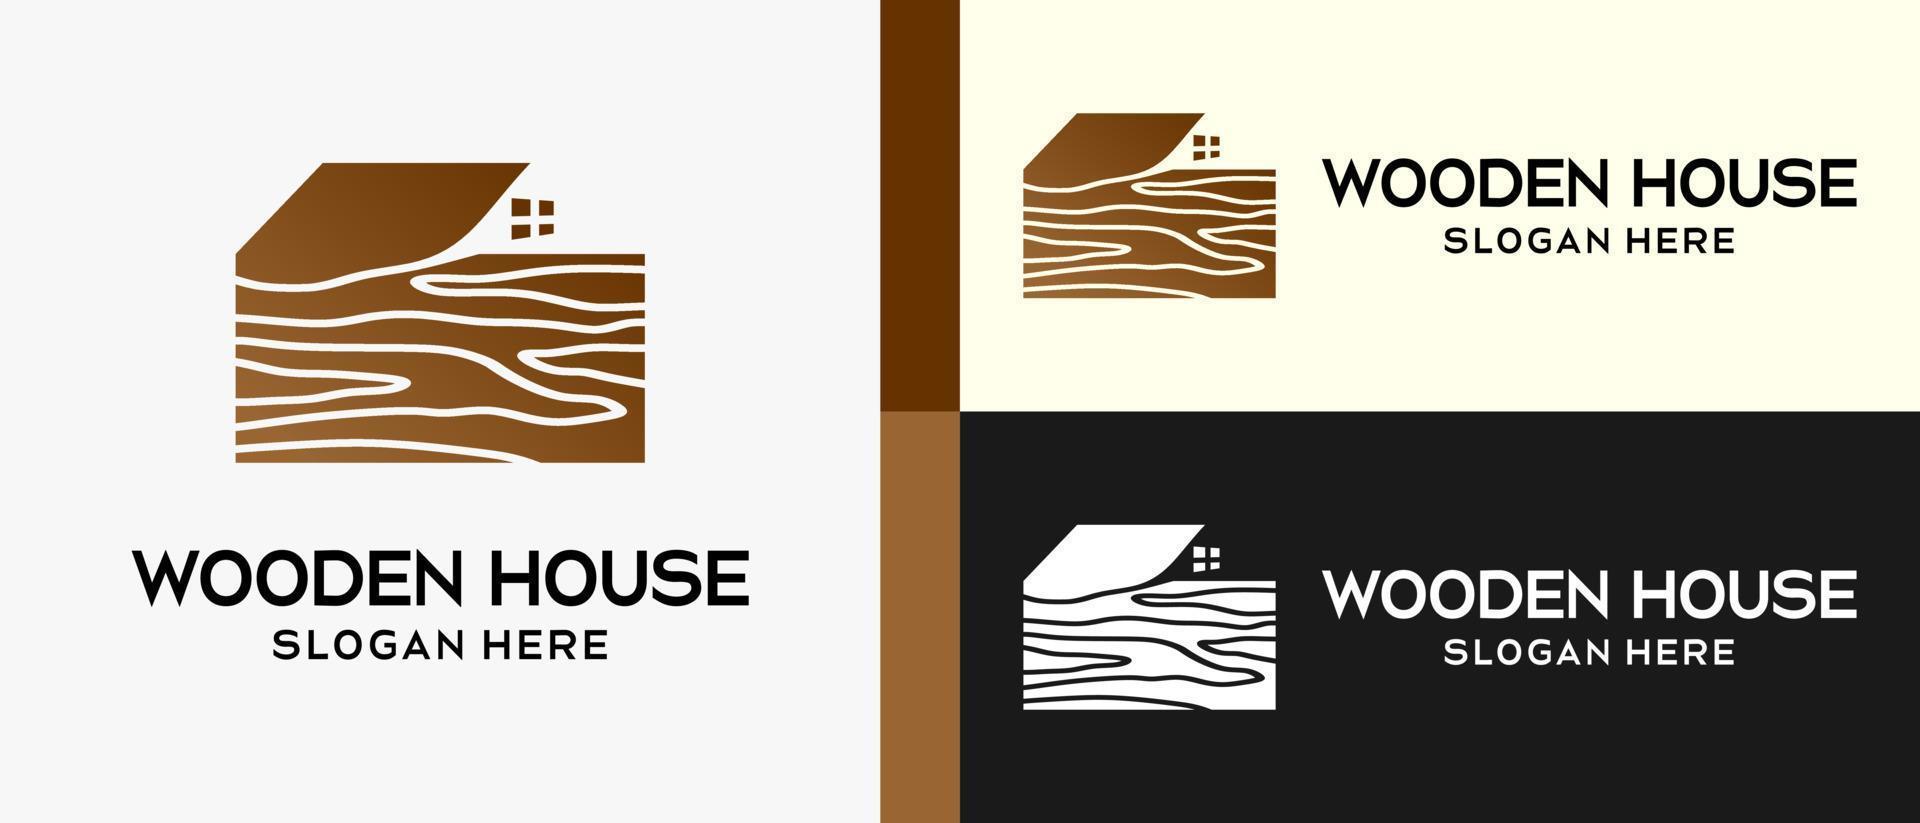 Wooden house logo with Premium Vector creative elements. vector illustration